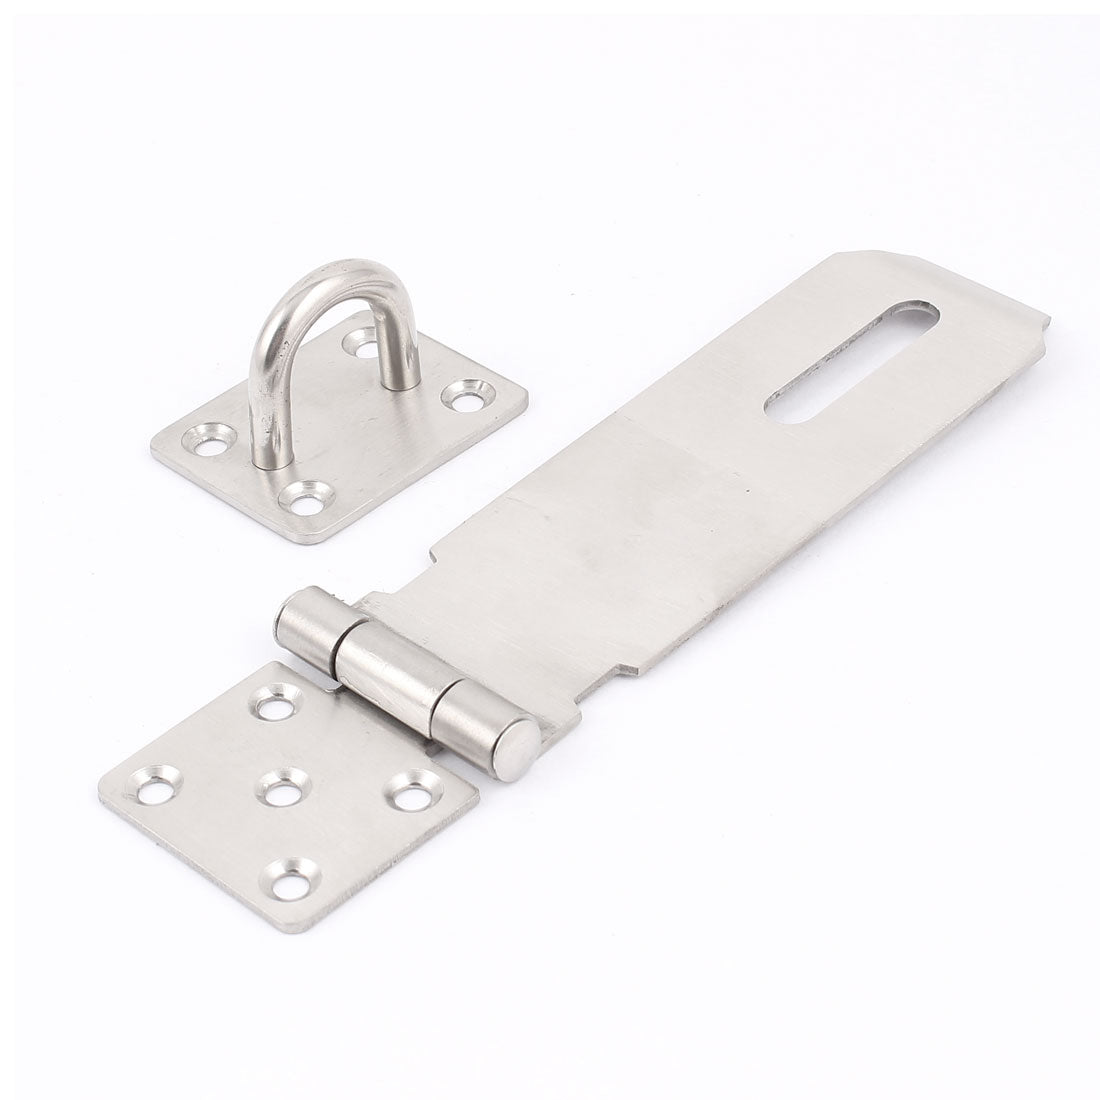 uxcell Uxcell 6" Long Silver Tone Metal Door Cupboard Cabinet Clasp Gate Lock Padlock Latch Hasp Staple